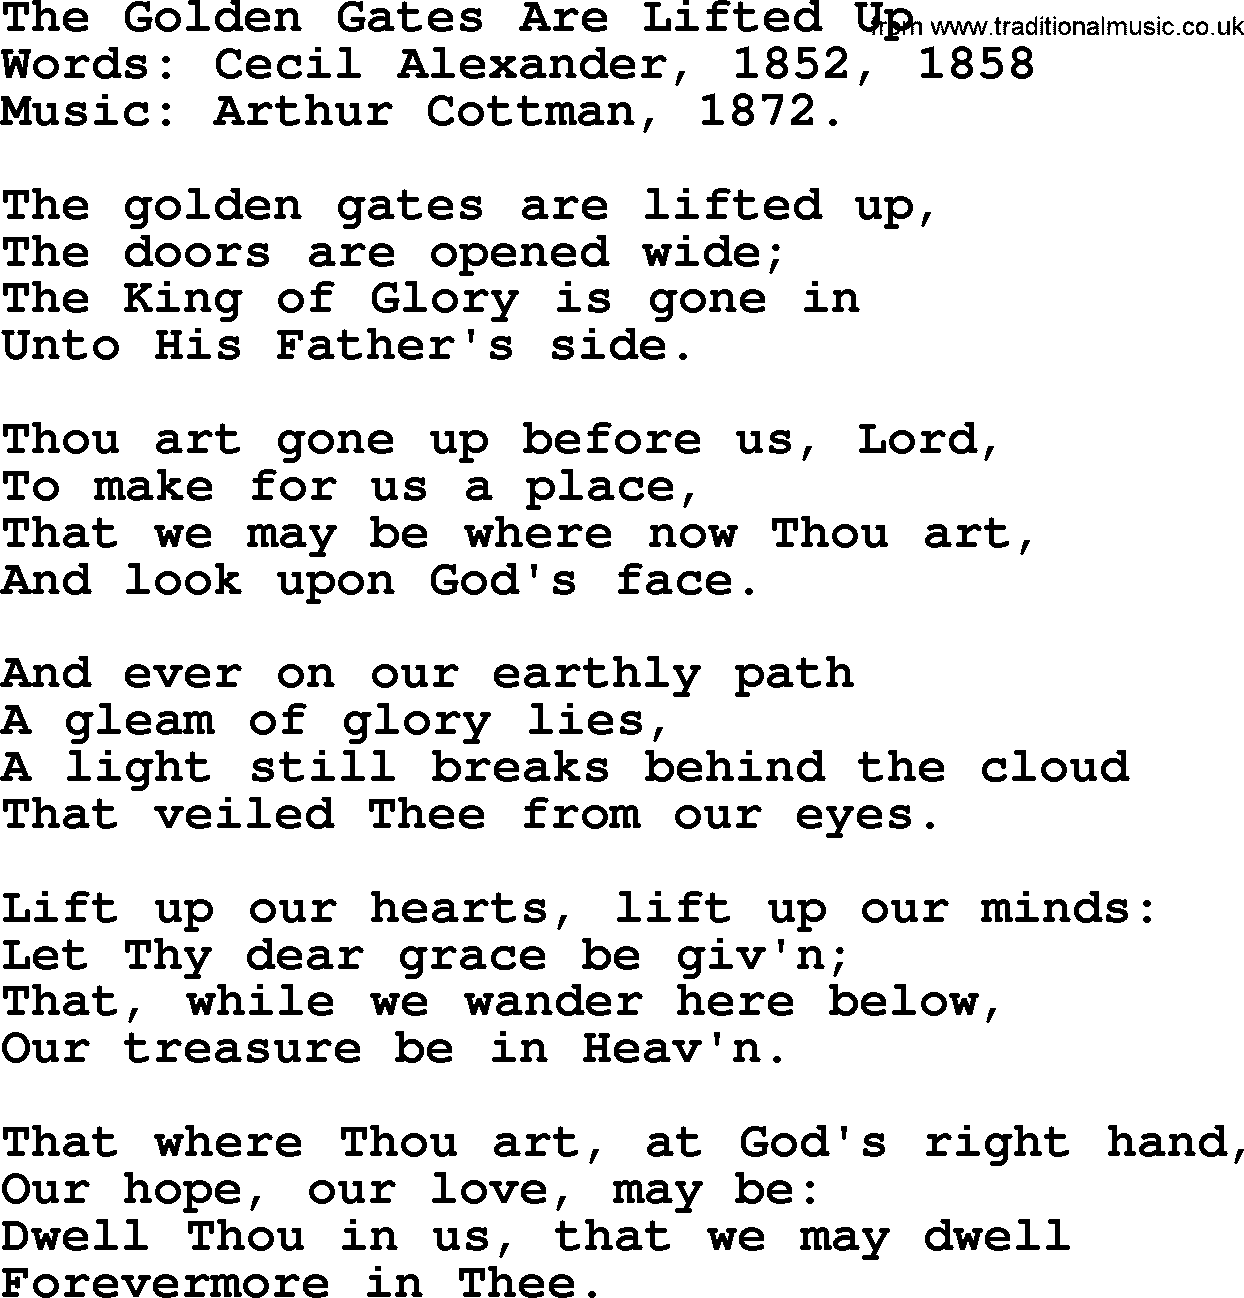 Ascensiontide Hynms collection, Hymn: The Golden Gates Are Lifted Up, lyrics and PDF